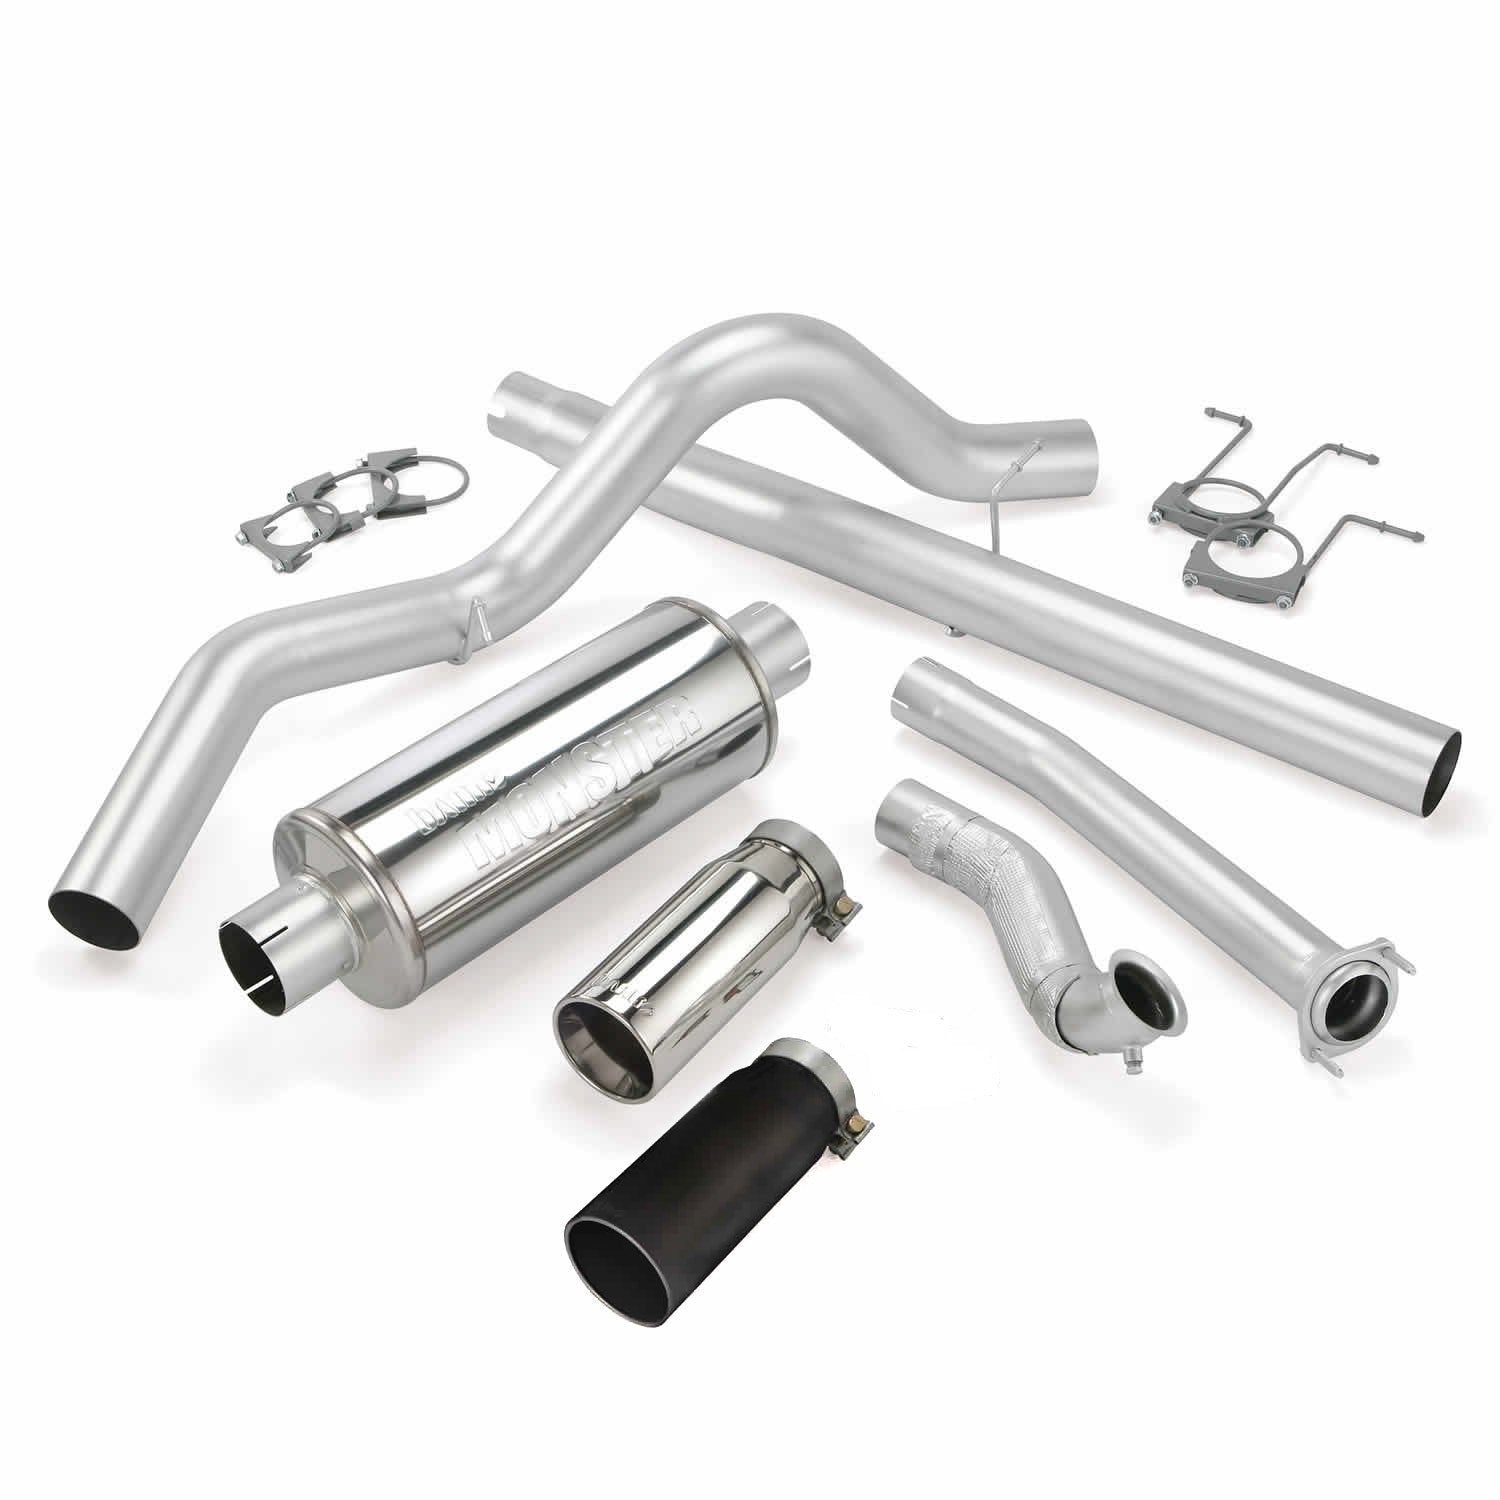 Monster Exhaust System 46299-b and chrome